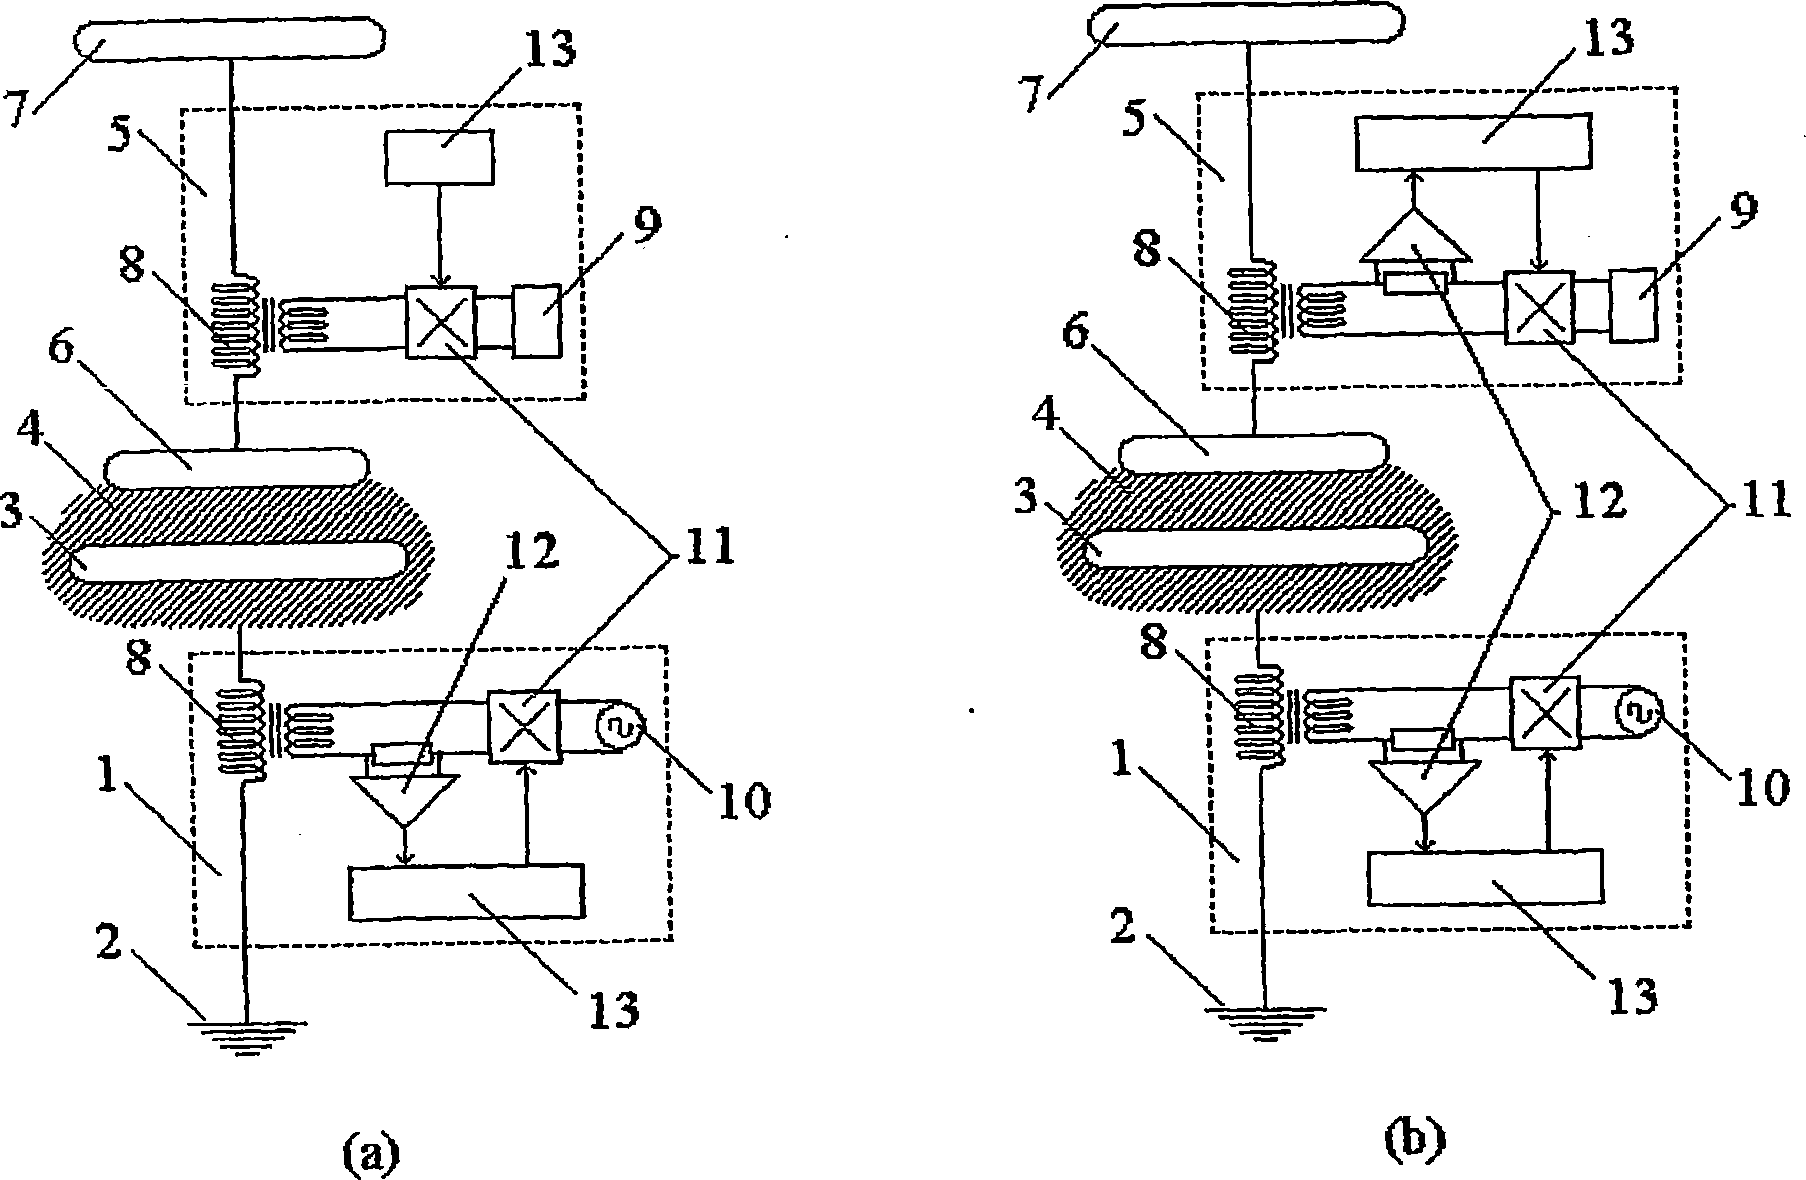 Apparatus for inducting transmission energy locally through crossing dielectric